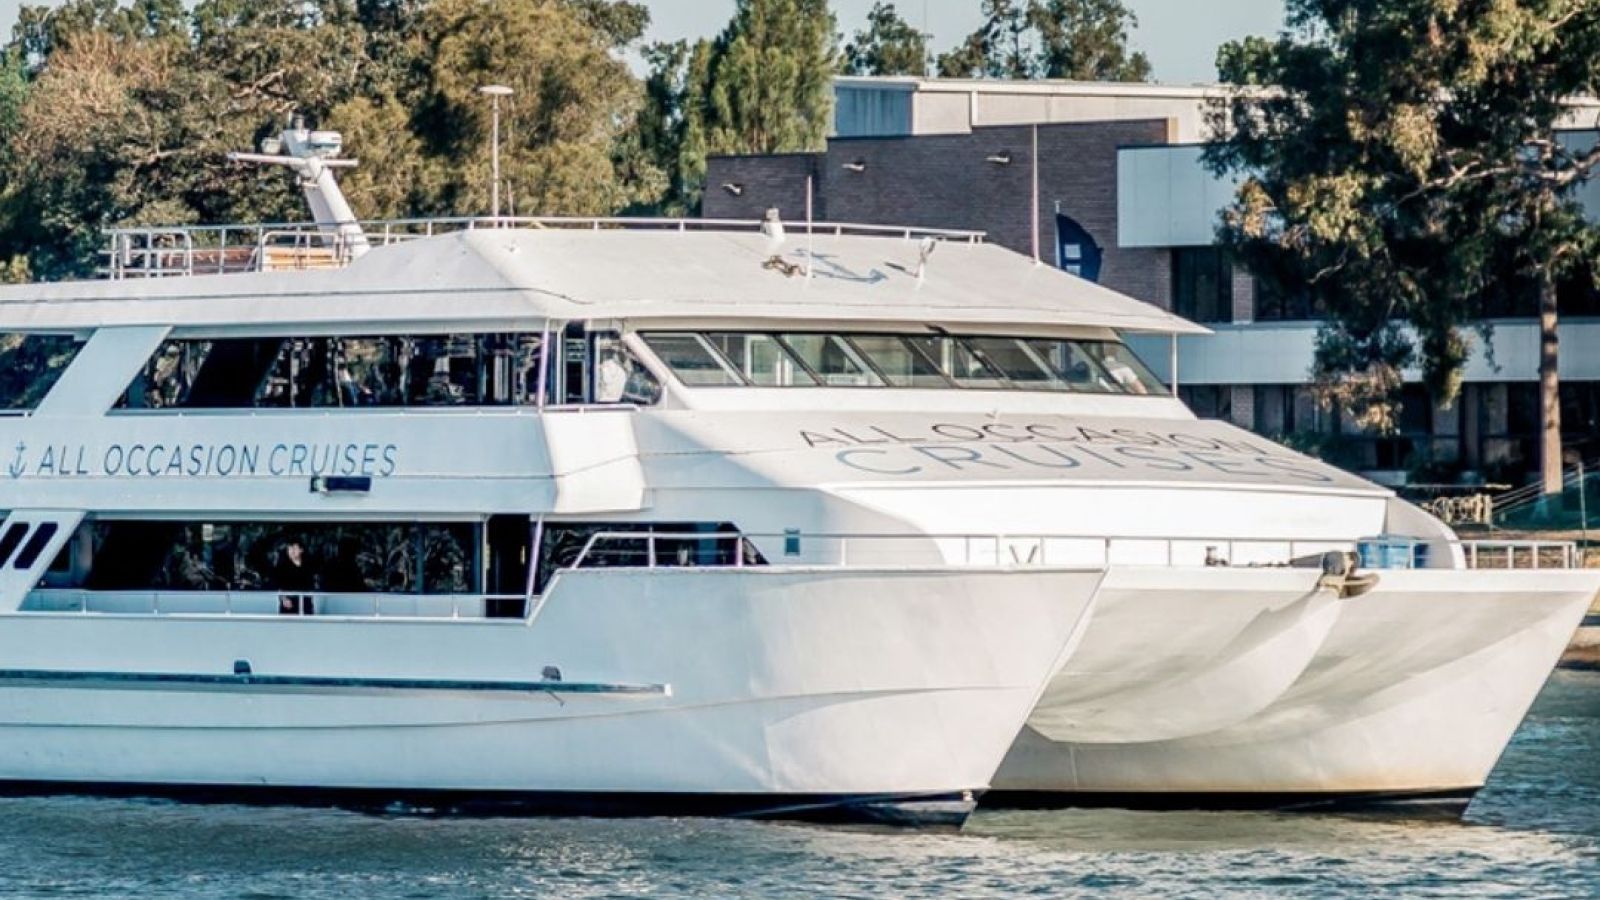 My Way Function Boat For Hire Sydney